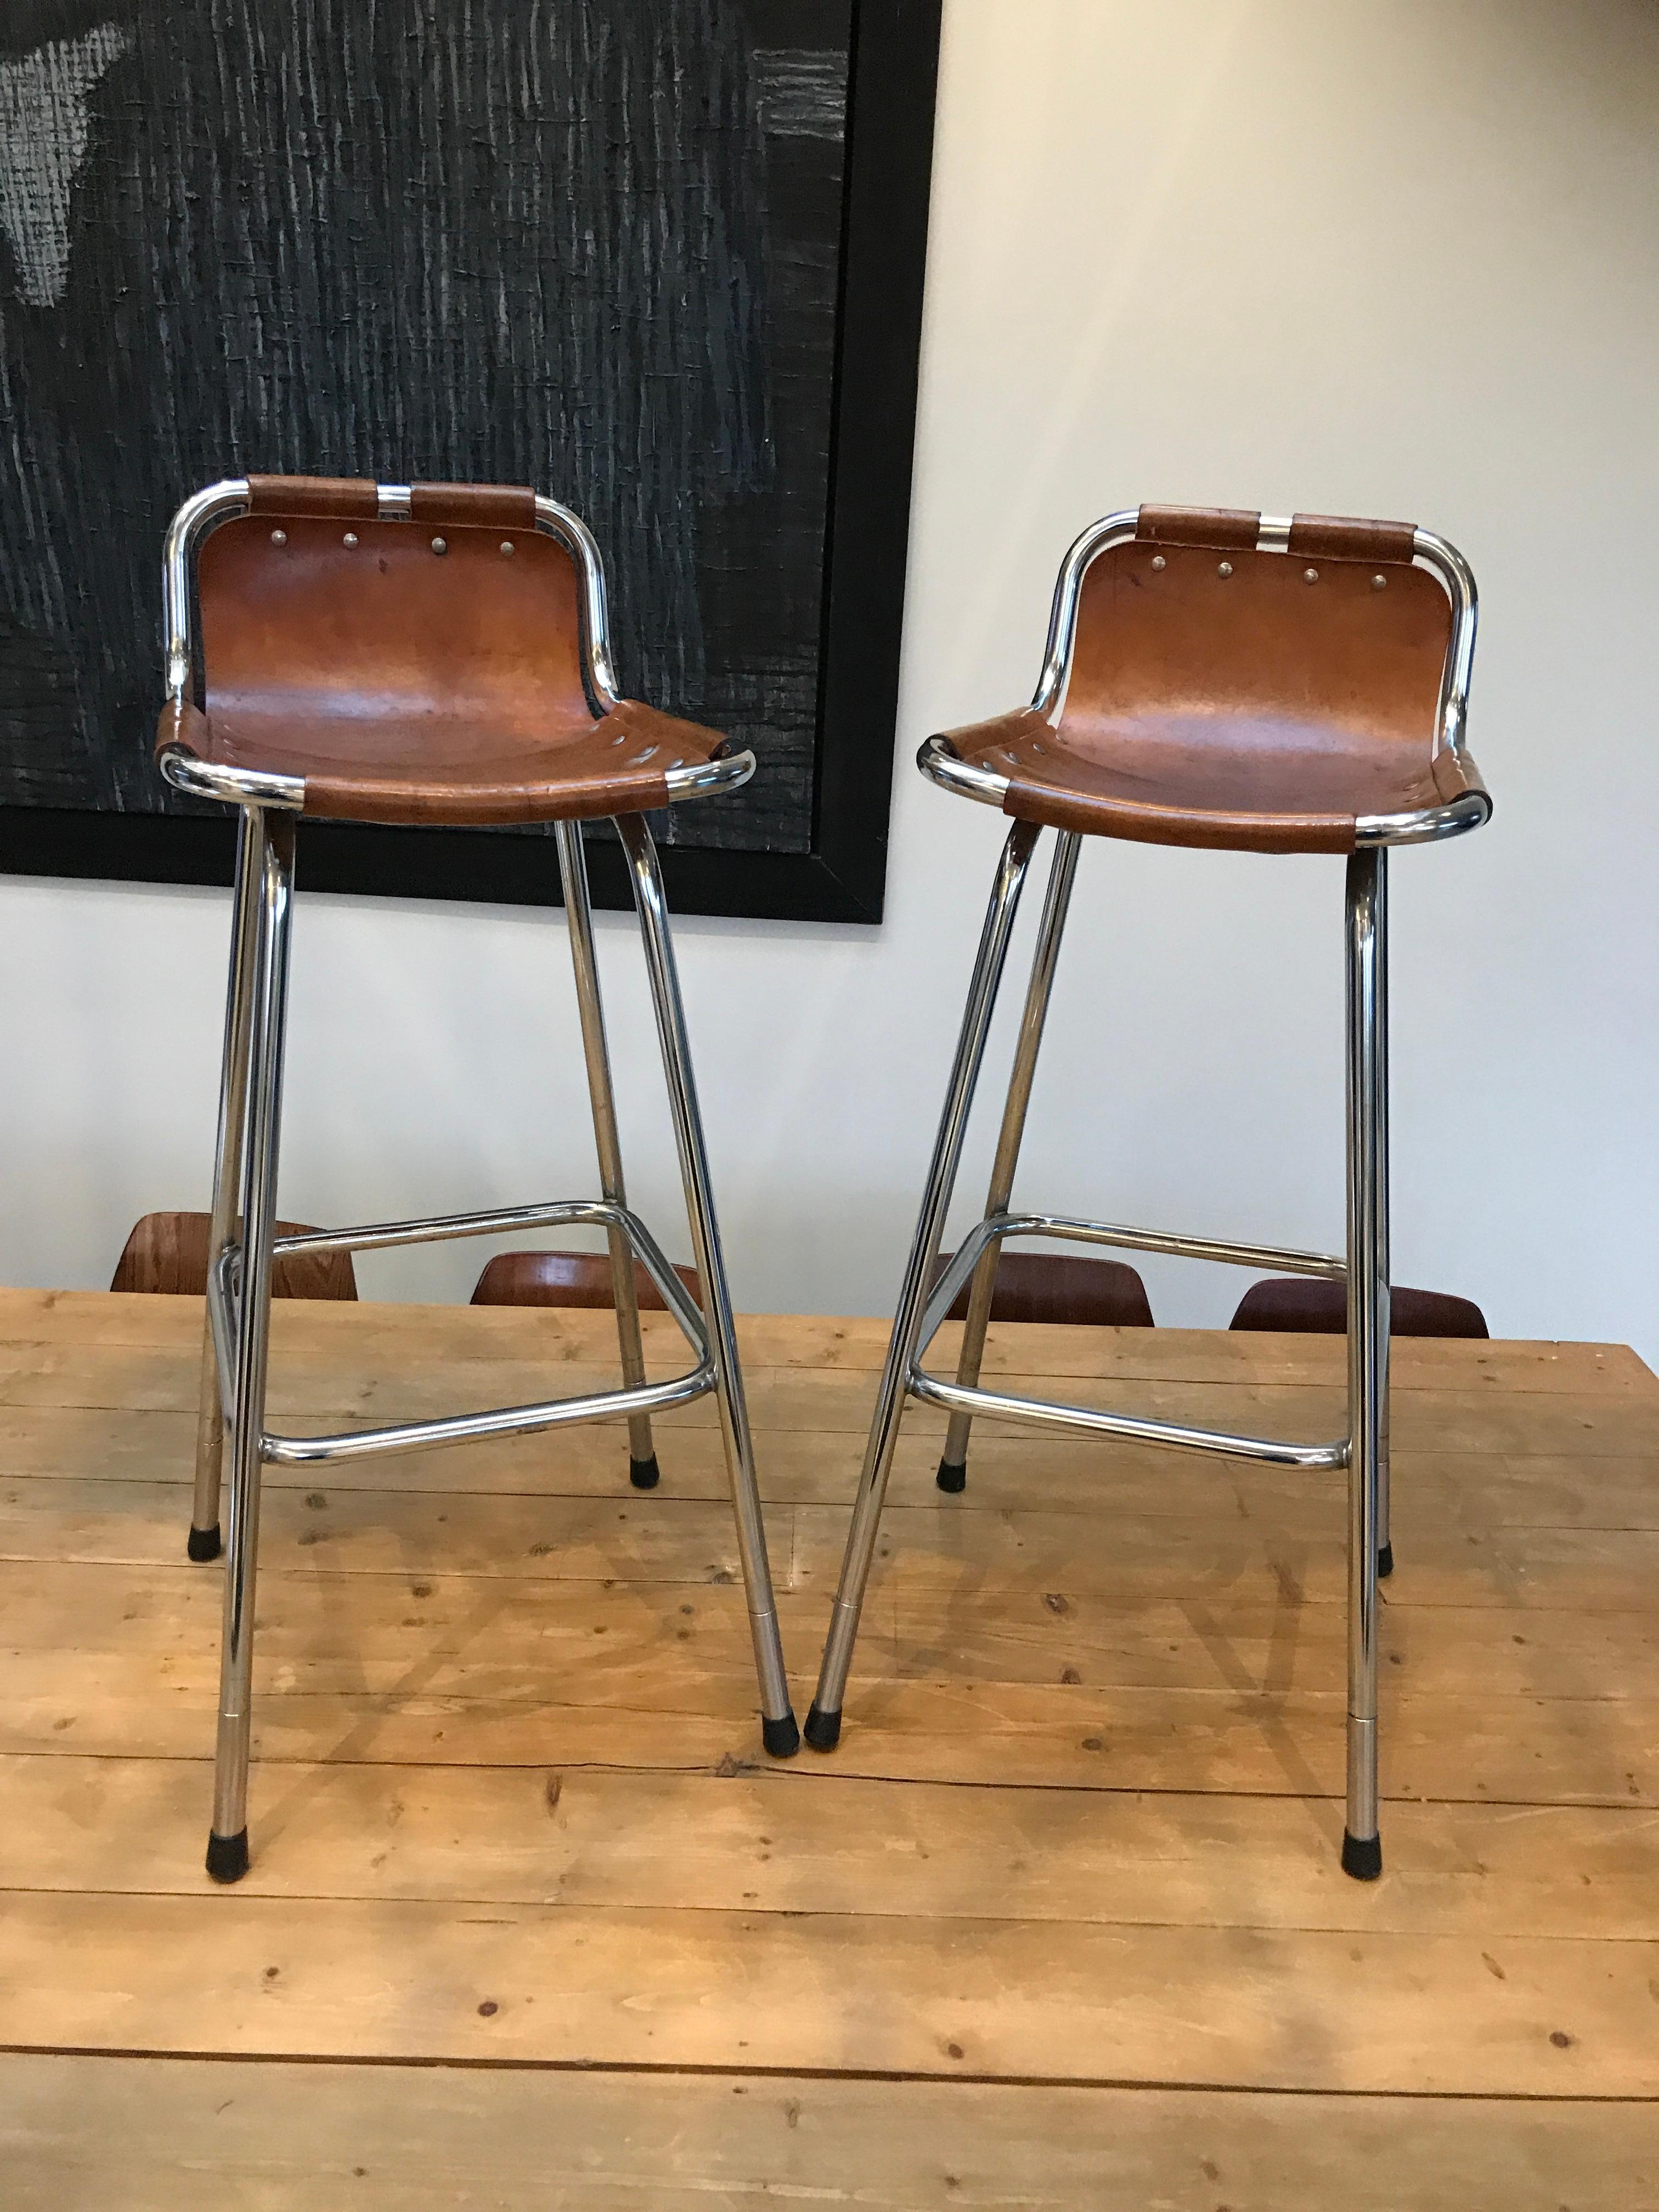 Stunning set of two stools, designer Charlotte Perriand used these in the Ski Resort Les Arcs, circa 1960. These stools were commissioned to be made by Cassina, one of the best Italian furniture maker’s, very nice chrome tubular frame with thick